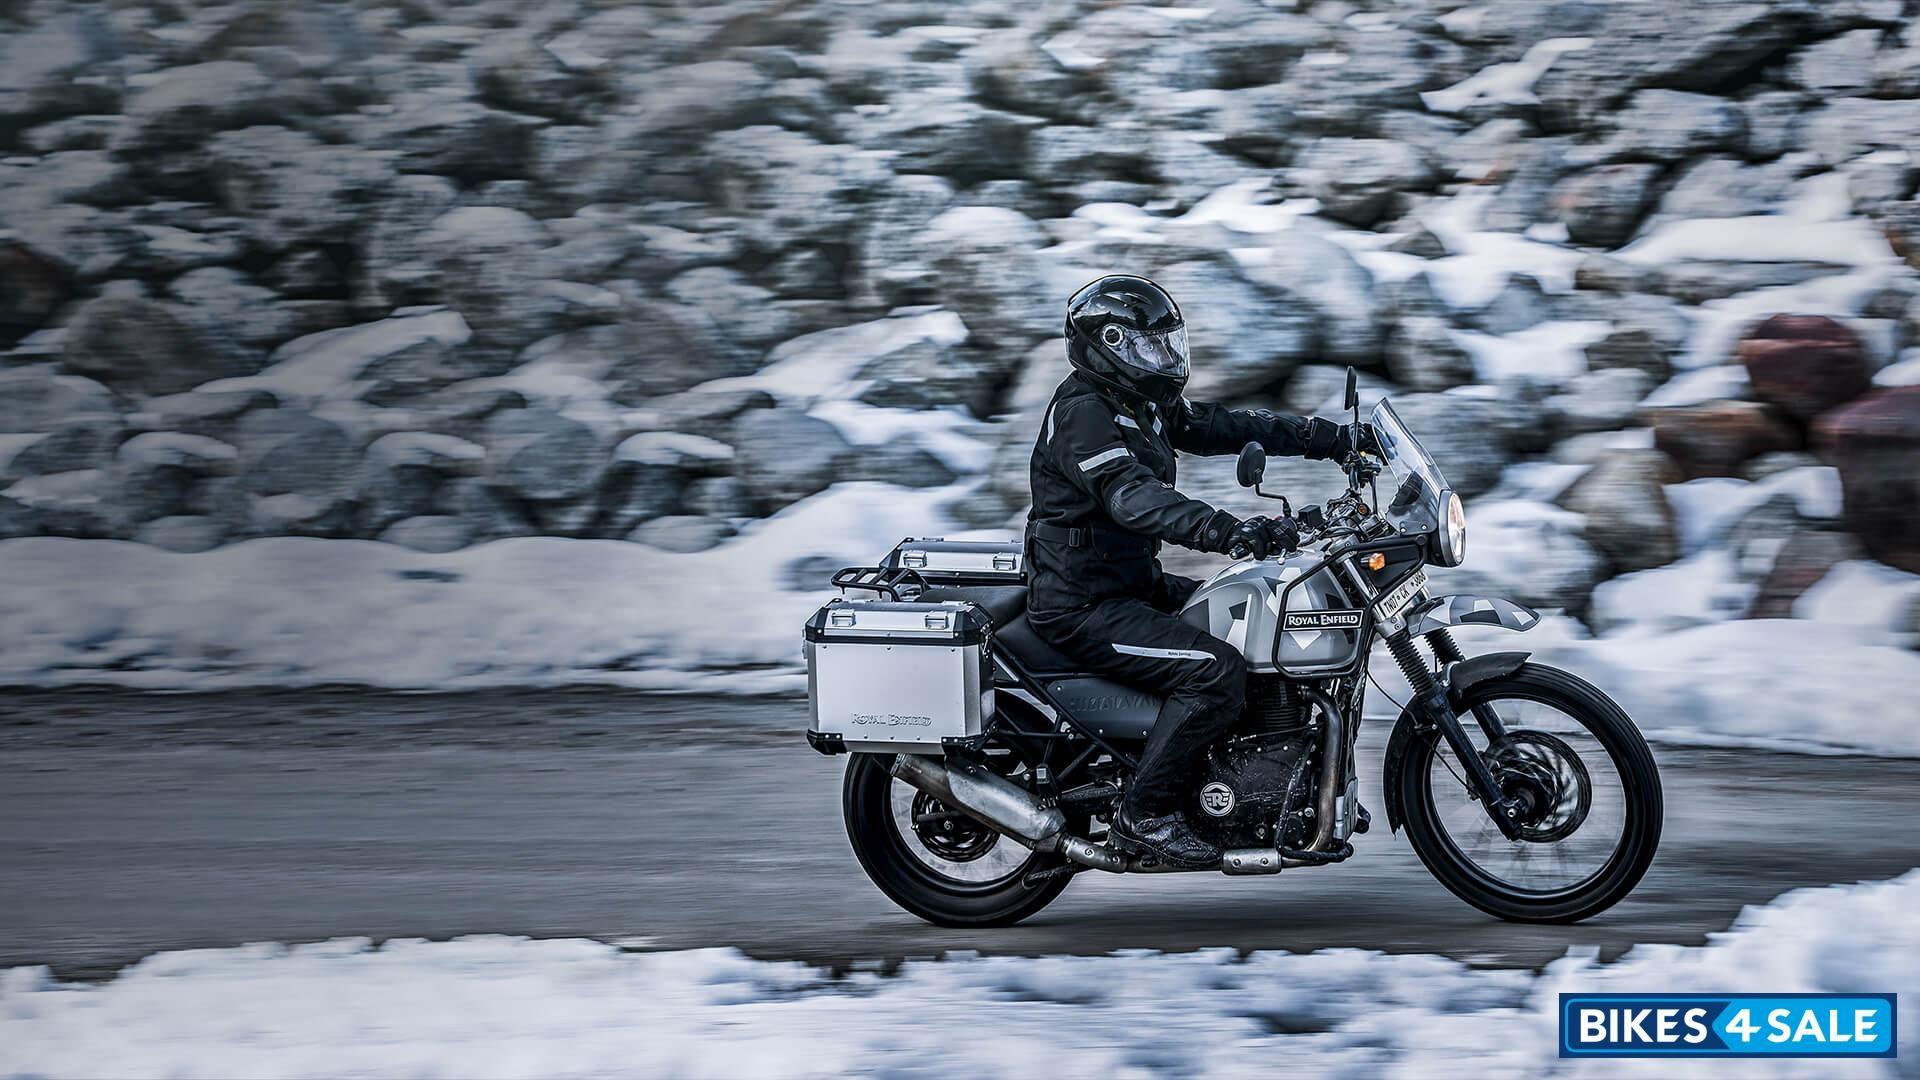 Royal Enfield Himalayan Sleet price, specs, mileage, colours